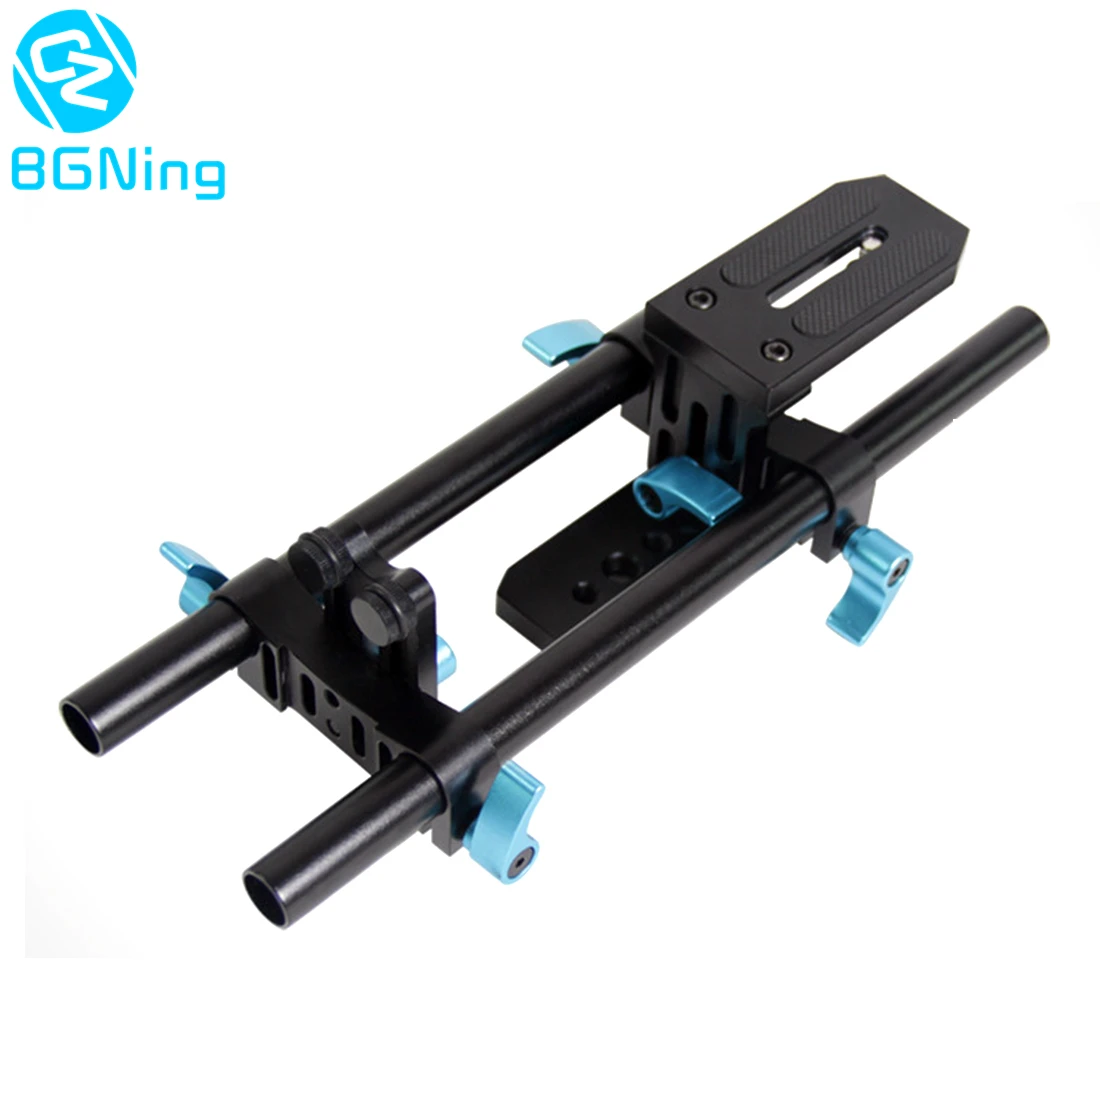 

15mm Rail Rod Support System Video Stabilizer Track Slider Baseplate 1/4" Screw Quick Release for Canon Nikon Sony DSLR Camera